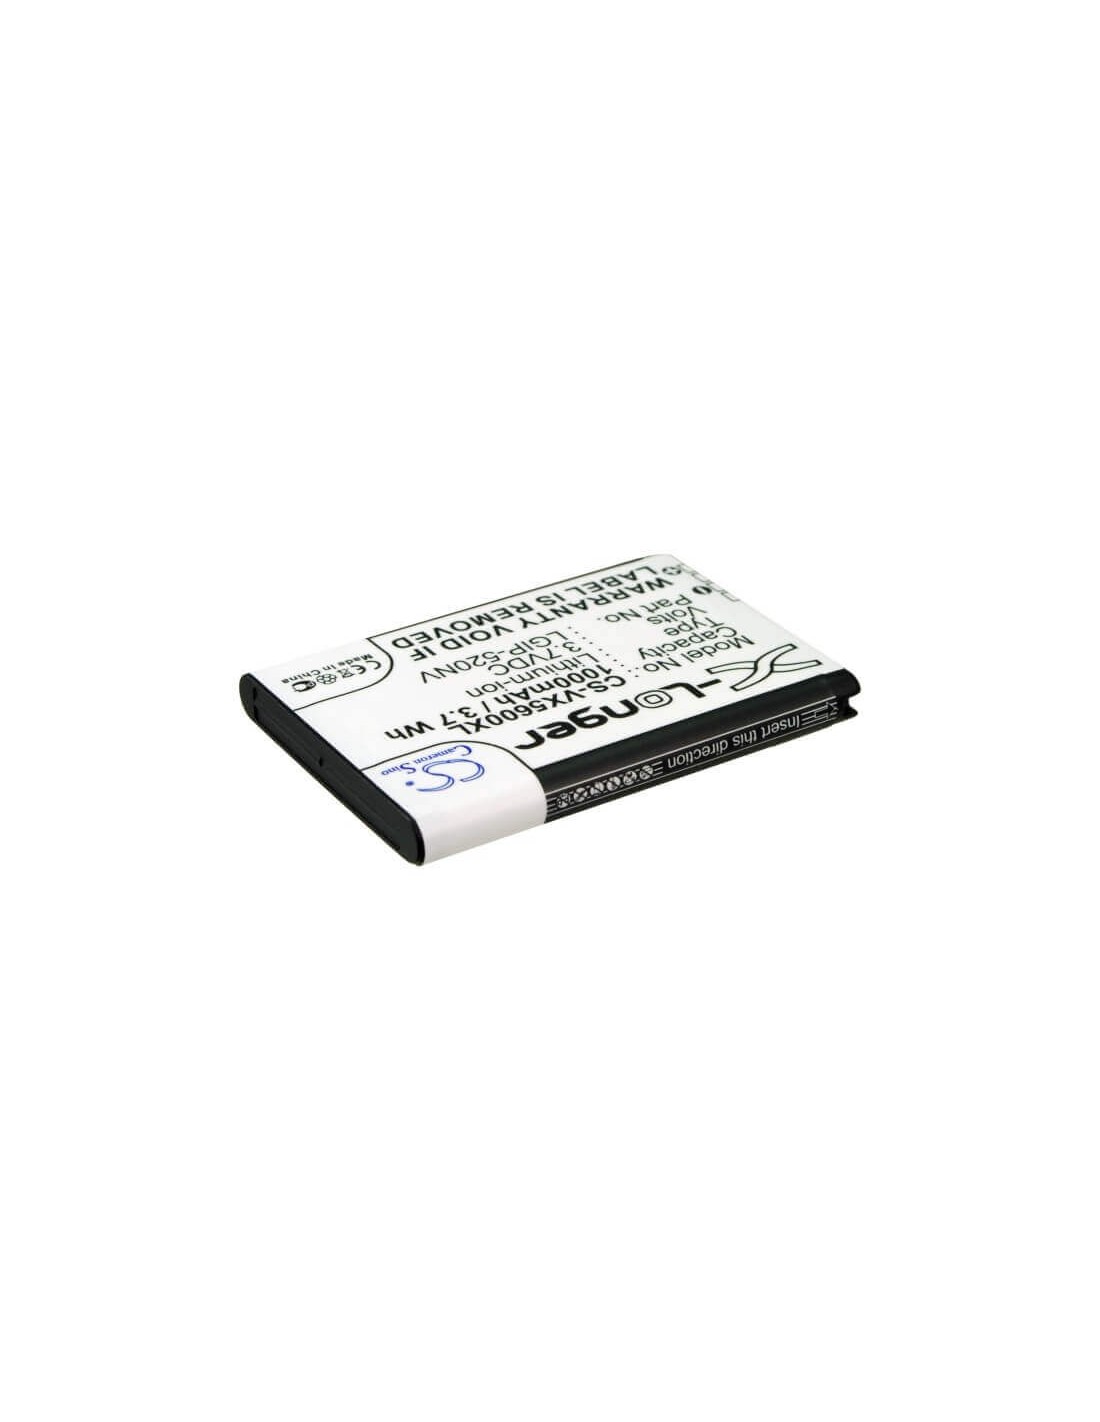 Battery for LG VN270 Cosmos Touch, Cosmos Touch VN270, VN270 3.7V, 1000mAh - 3.70Wh